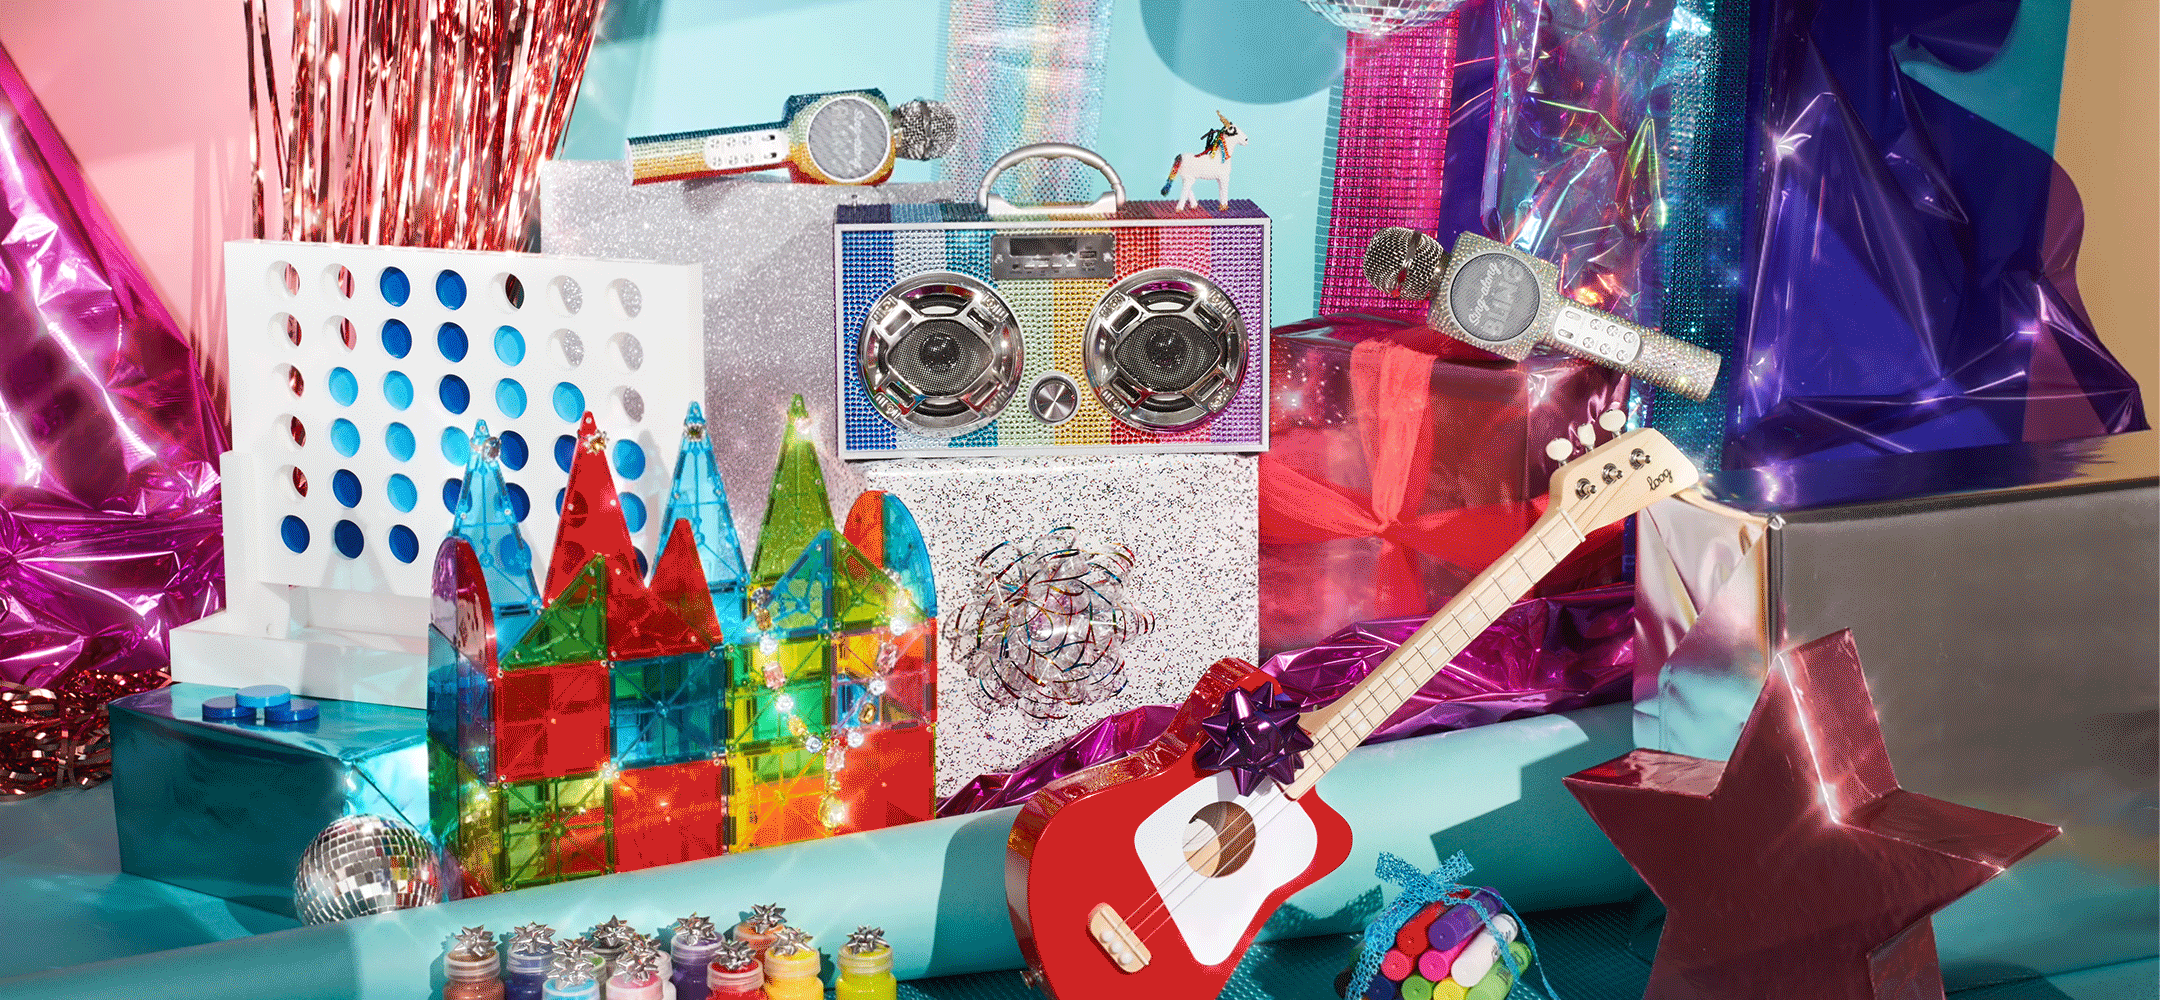 Holiday still life image of a toy guitar, Magna-tiles, karaoke microphone, boom box and connect four game,